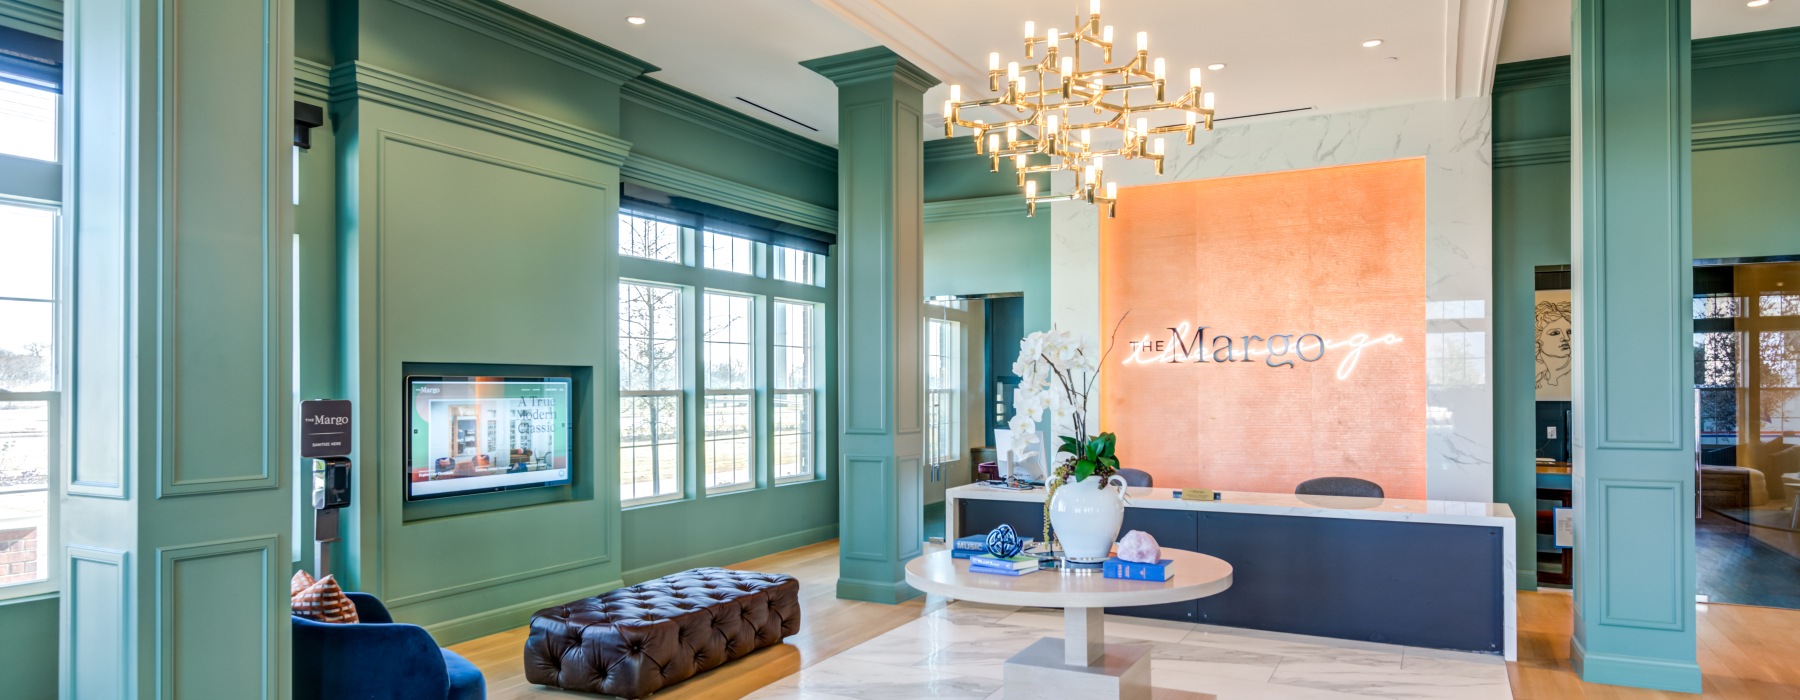 Front desk and lobby area at The Margo rental homes in Frisco